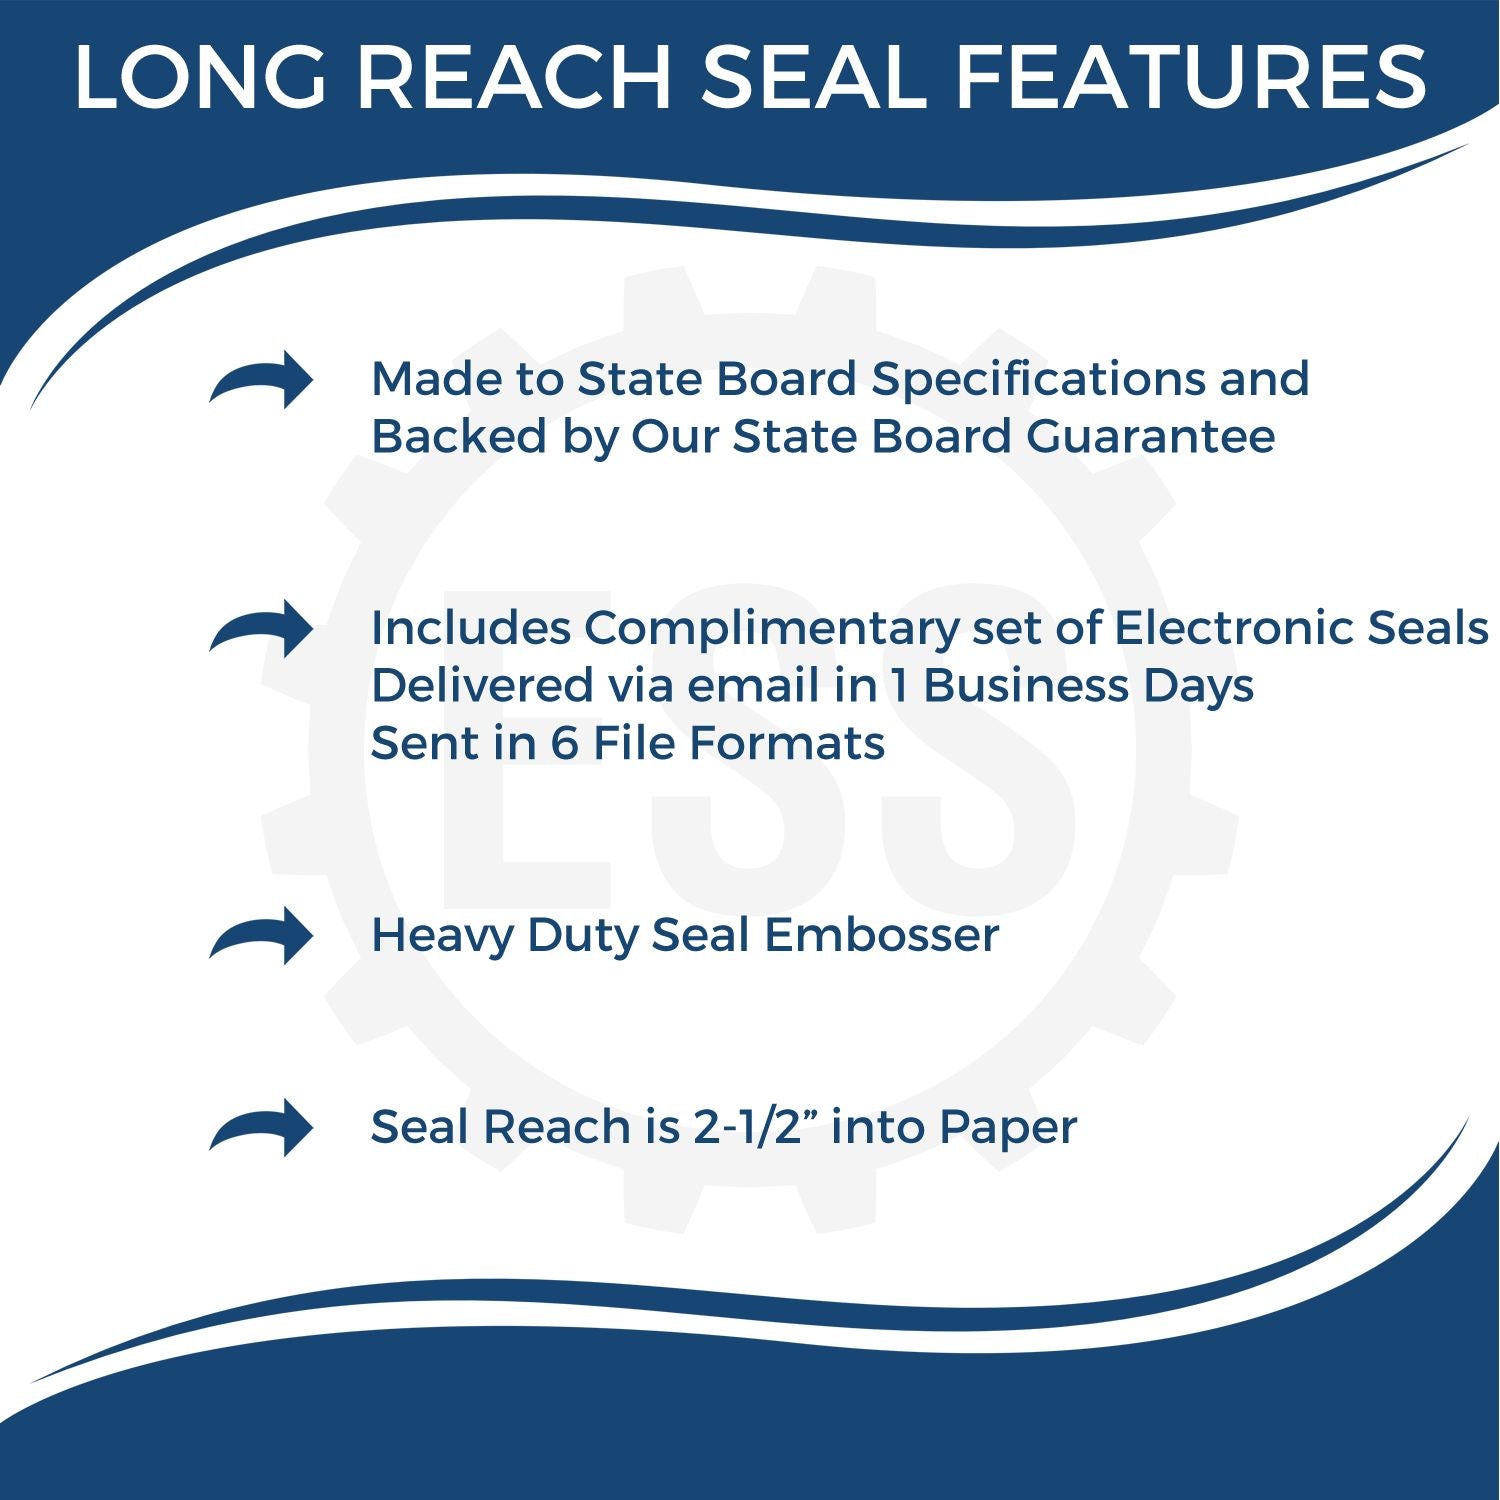 The main image for the Long Reach Hawaii PE Seal depicting a sample of the imprint and electronic files